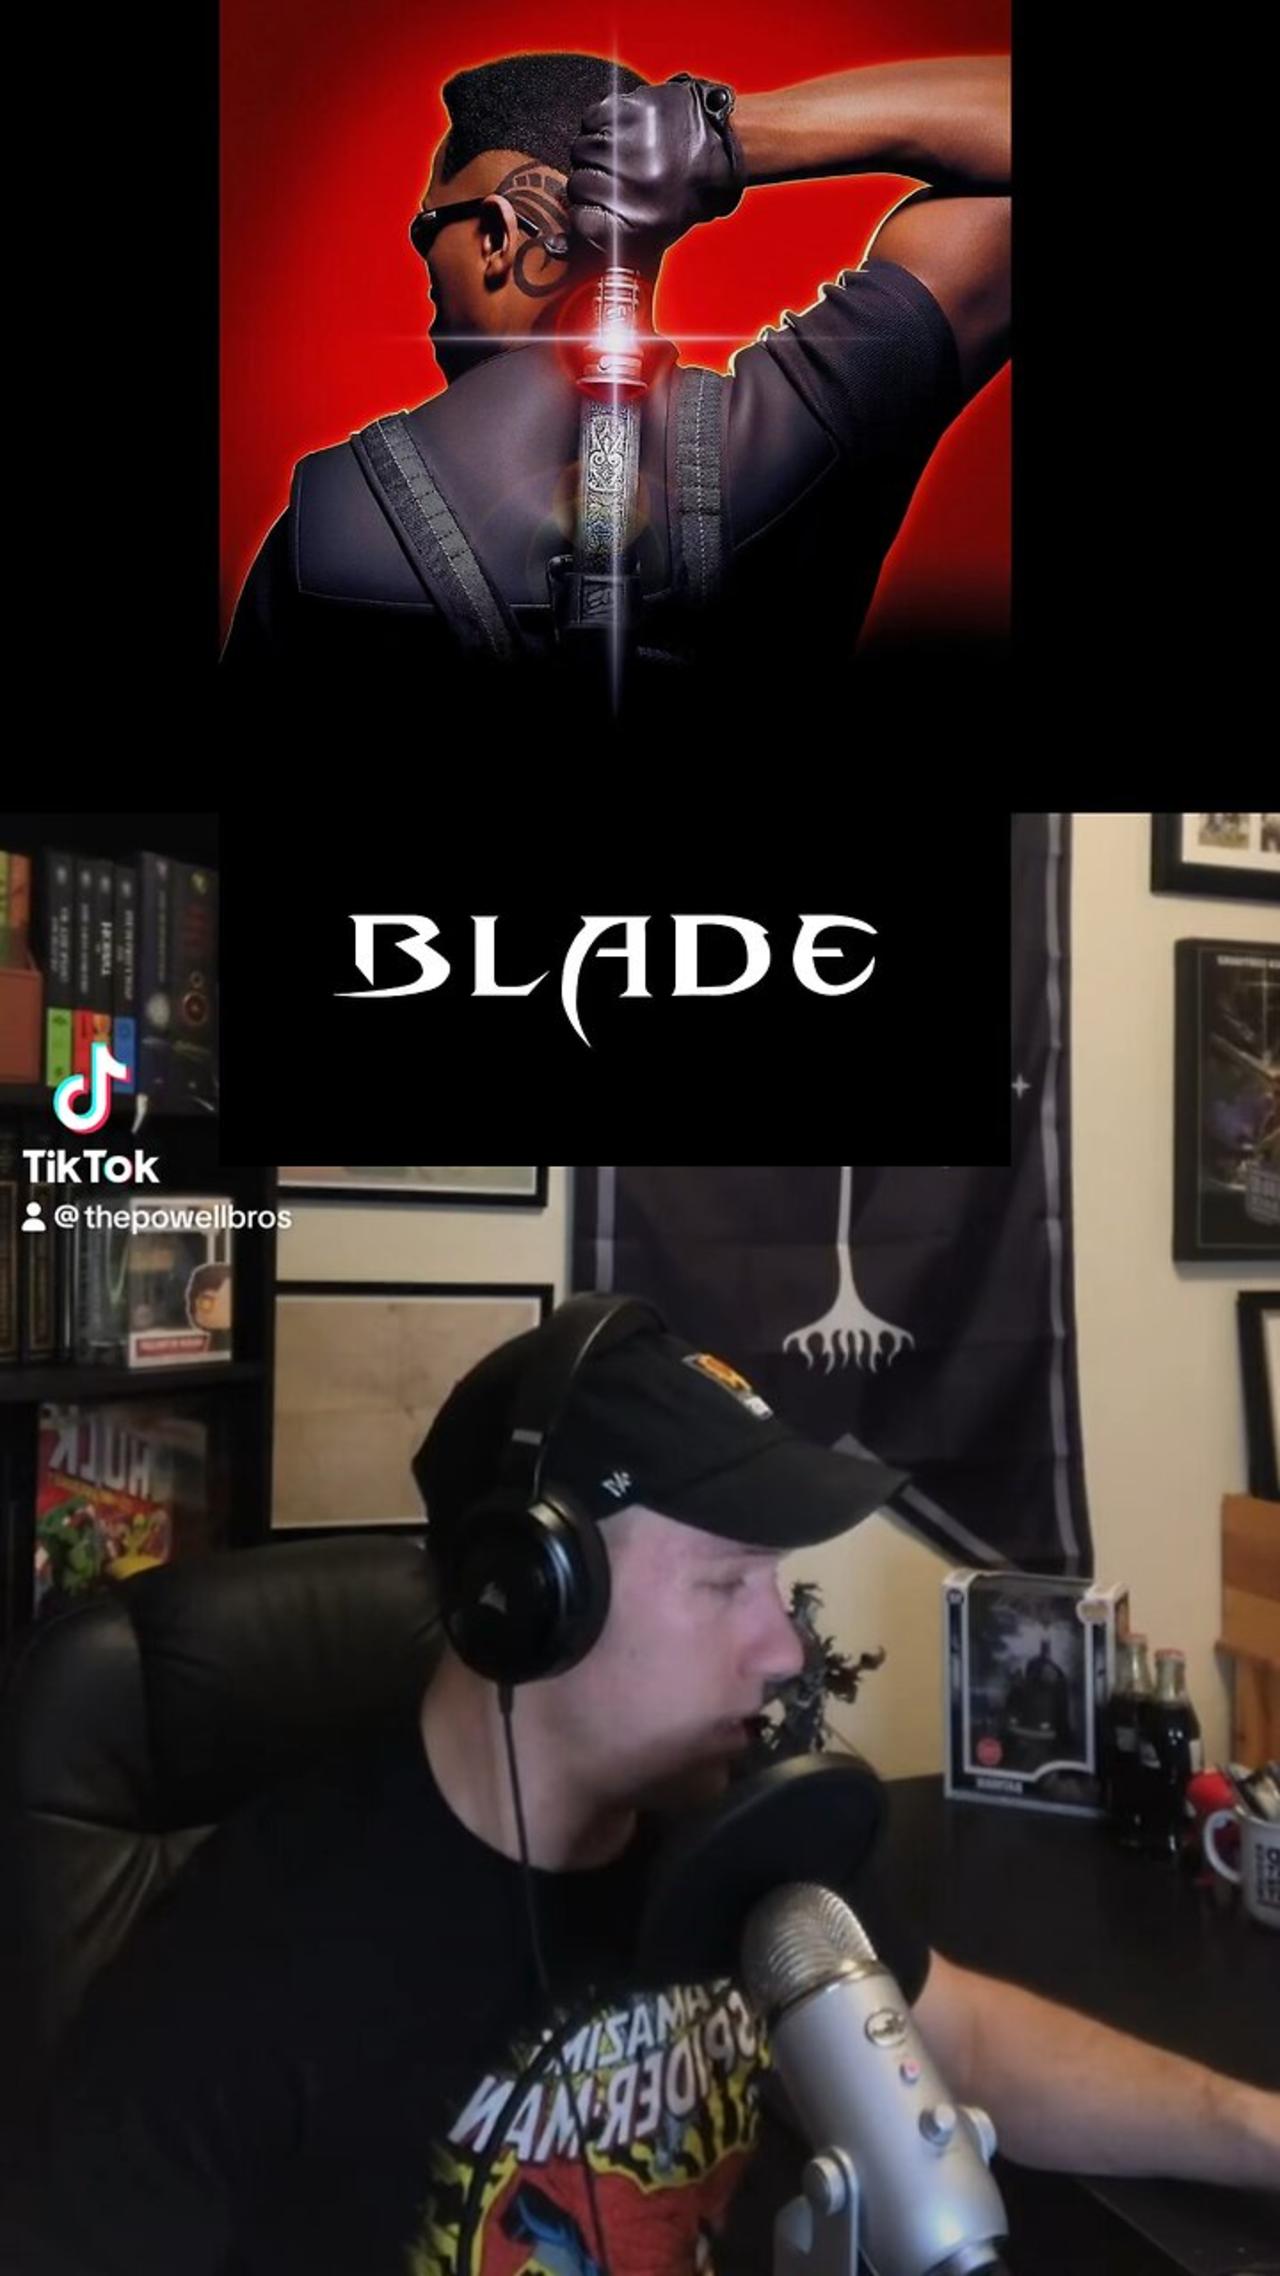 Let’s talk about Blade